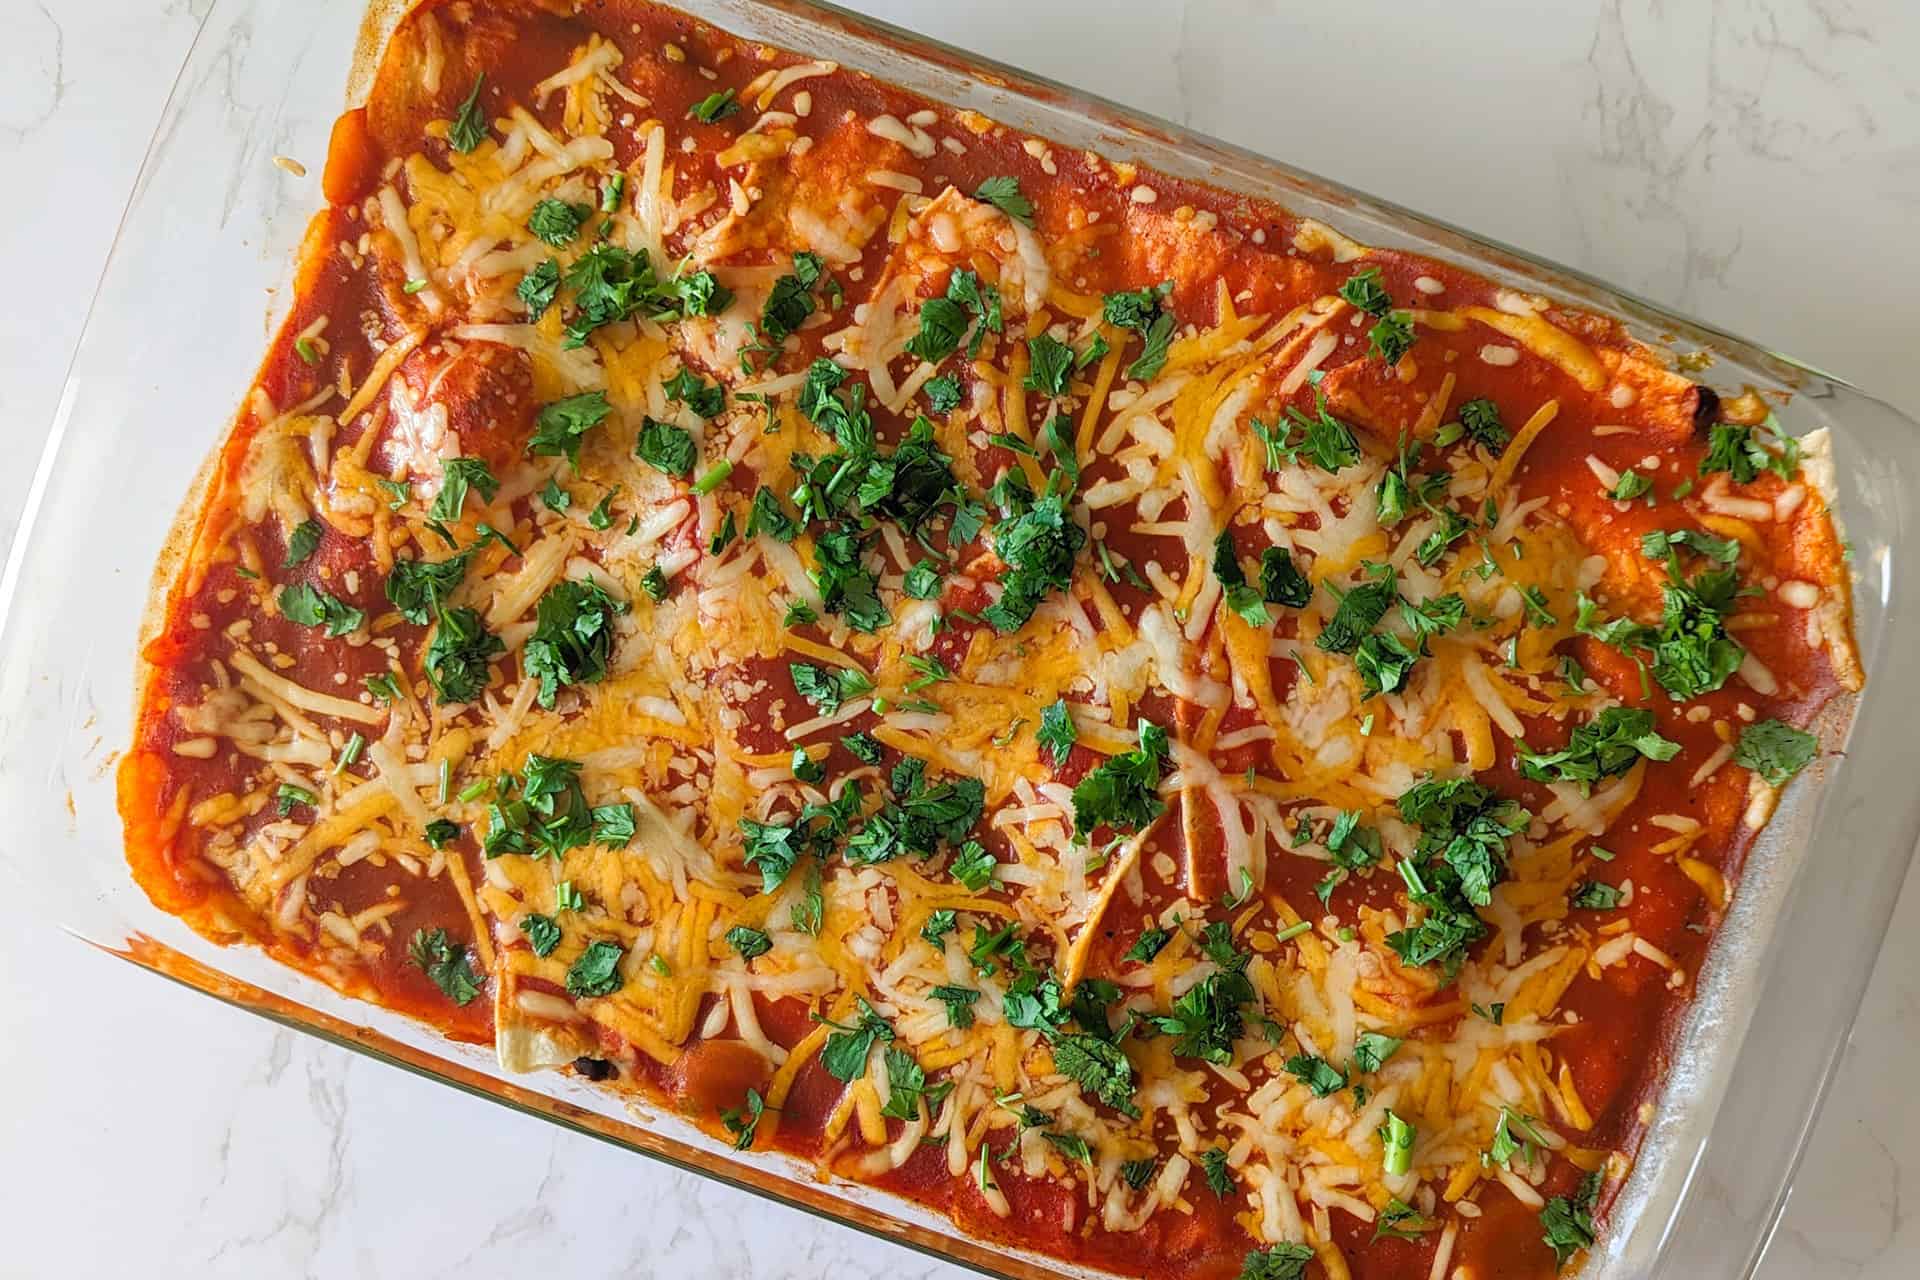 An easy chicken enchilada casserole served in a glass baking dish